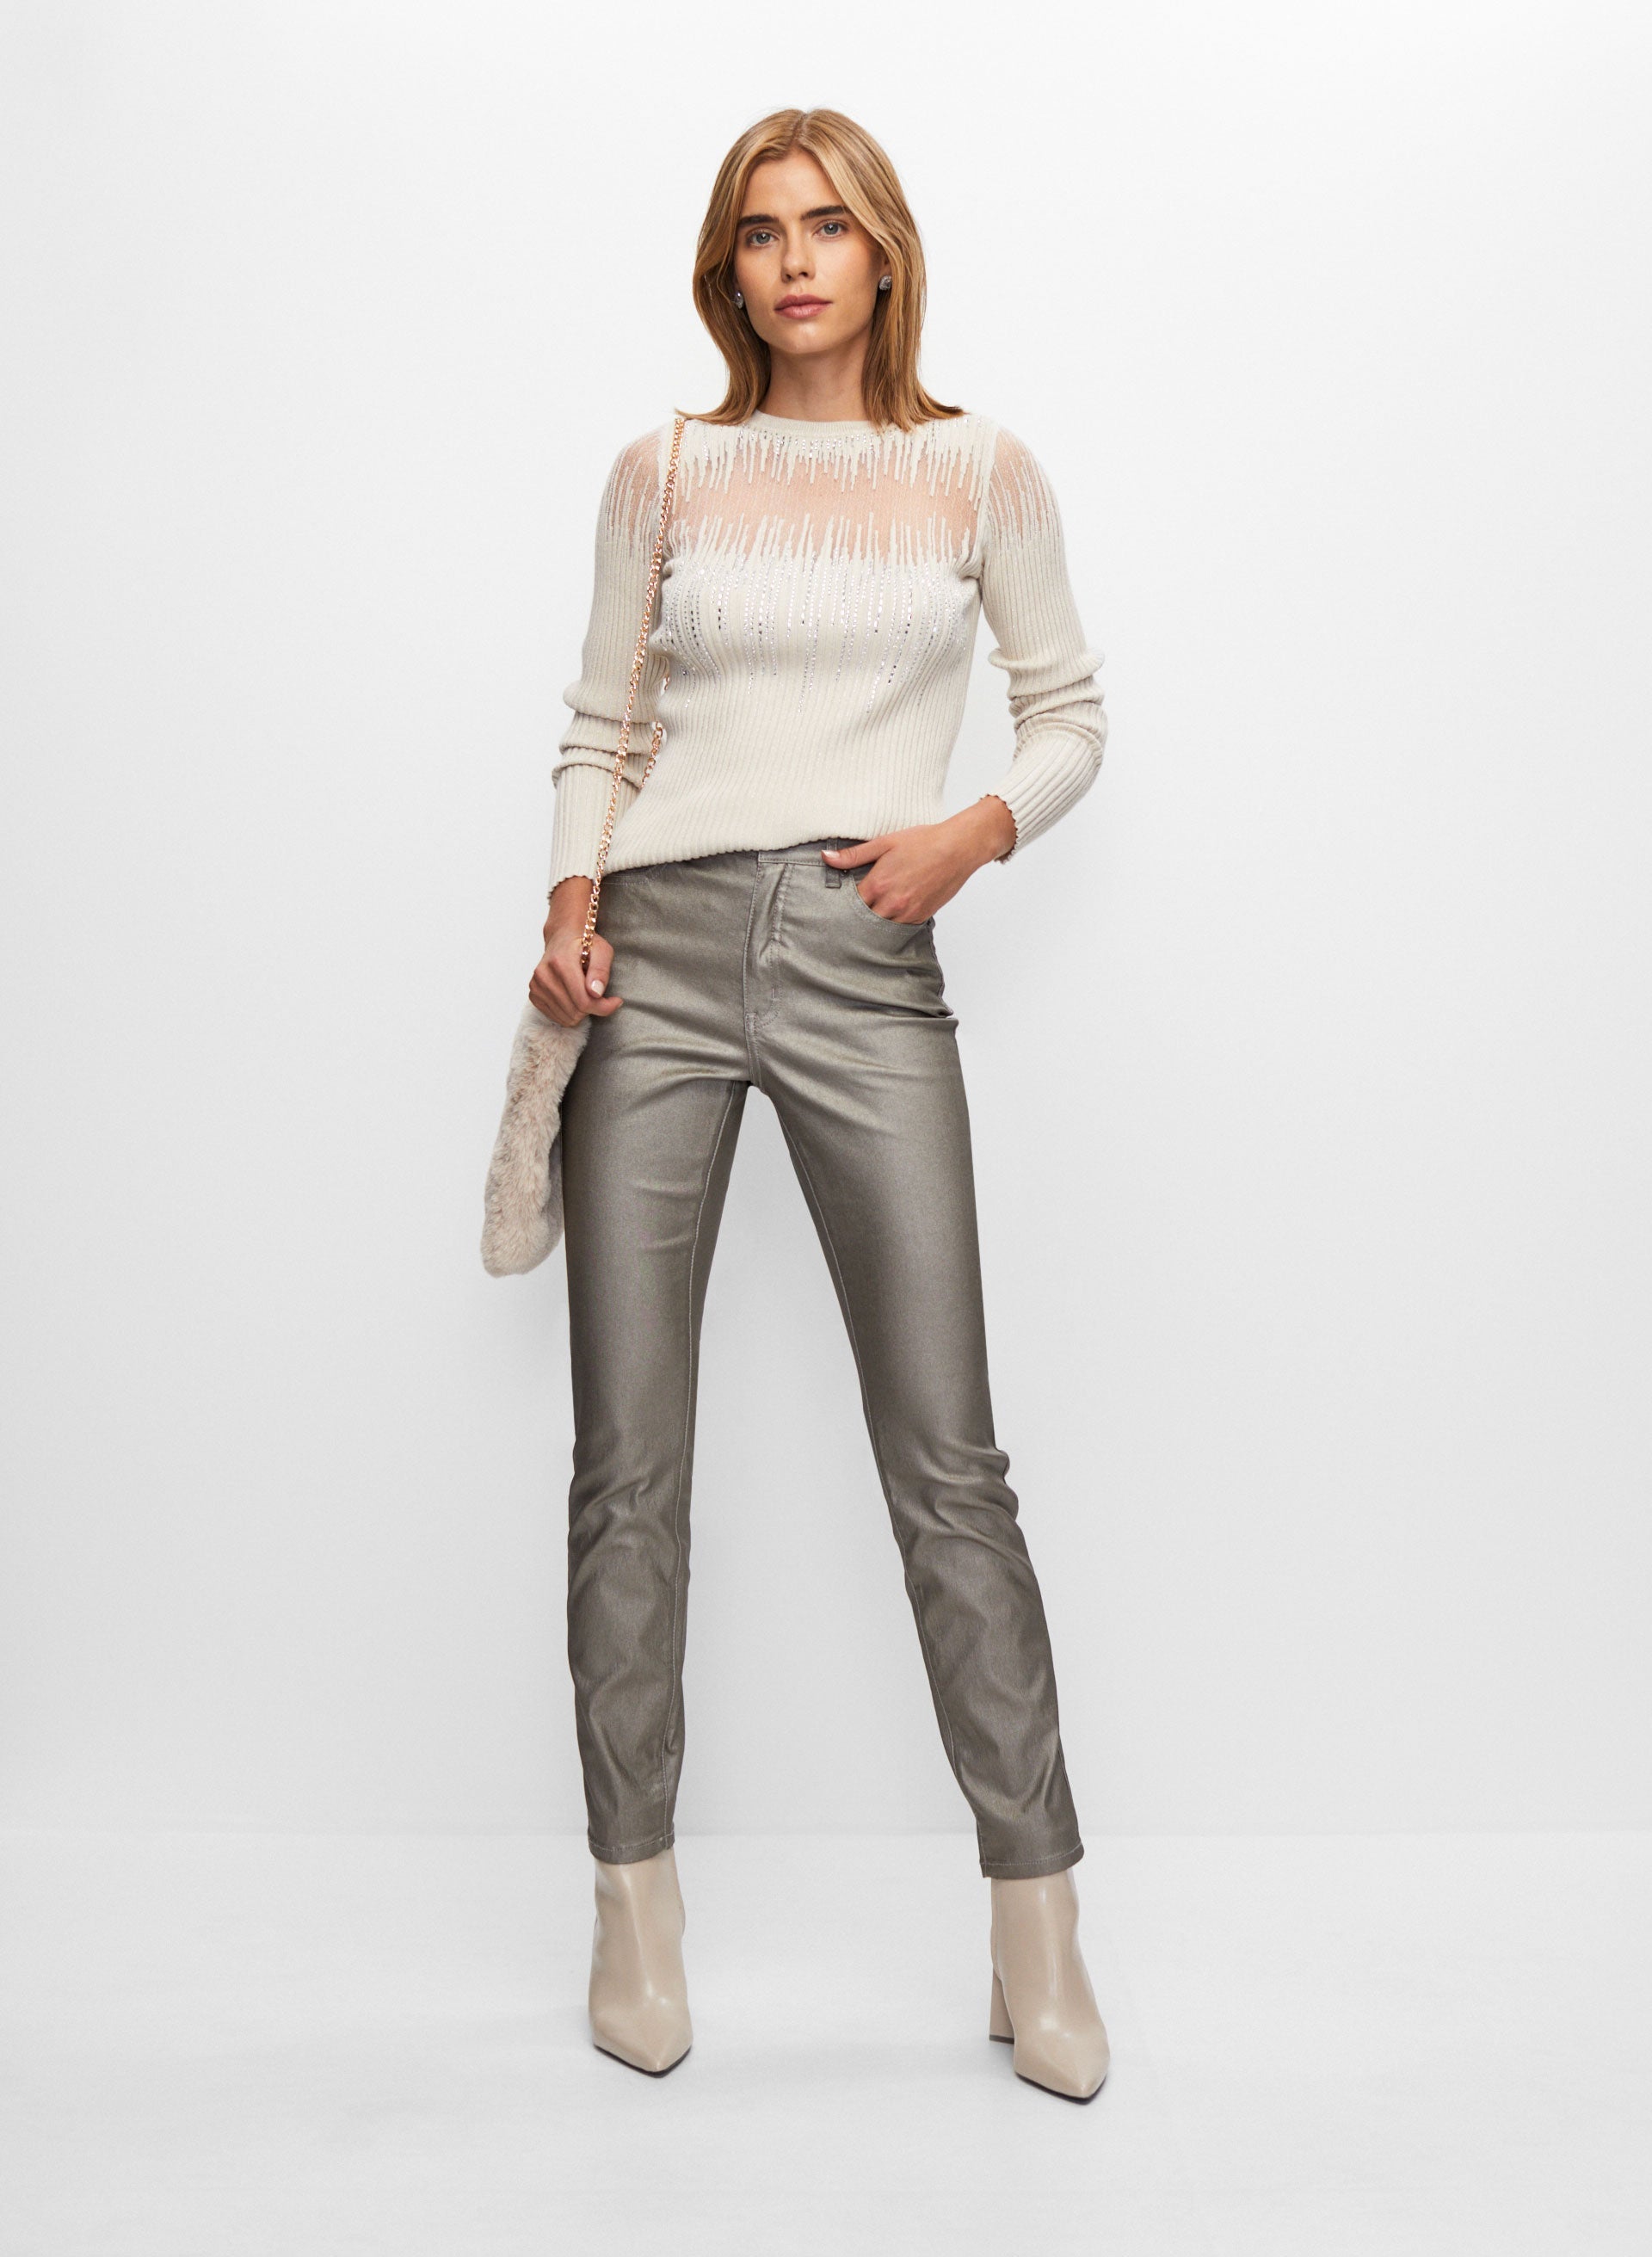 Sequined Sweater & Coated Jeans